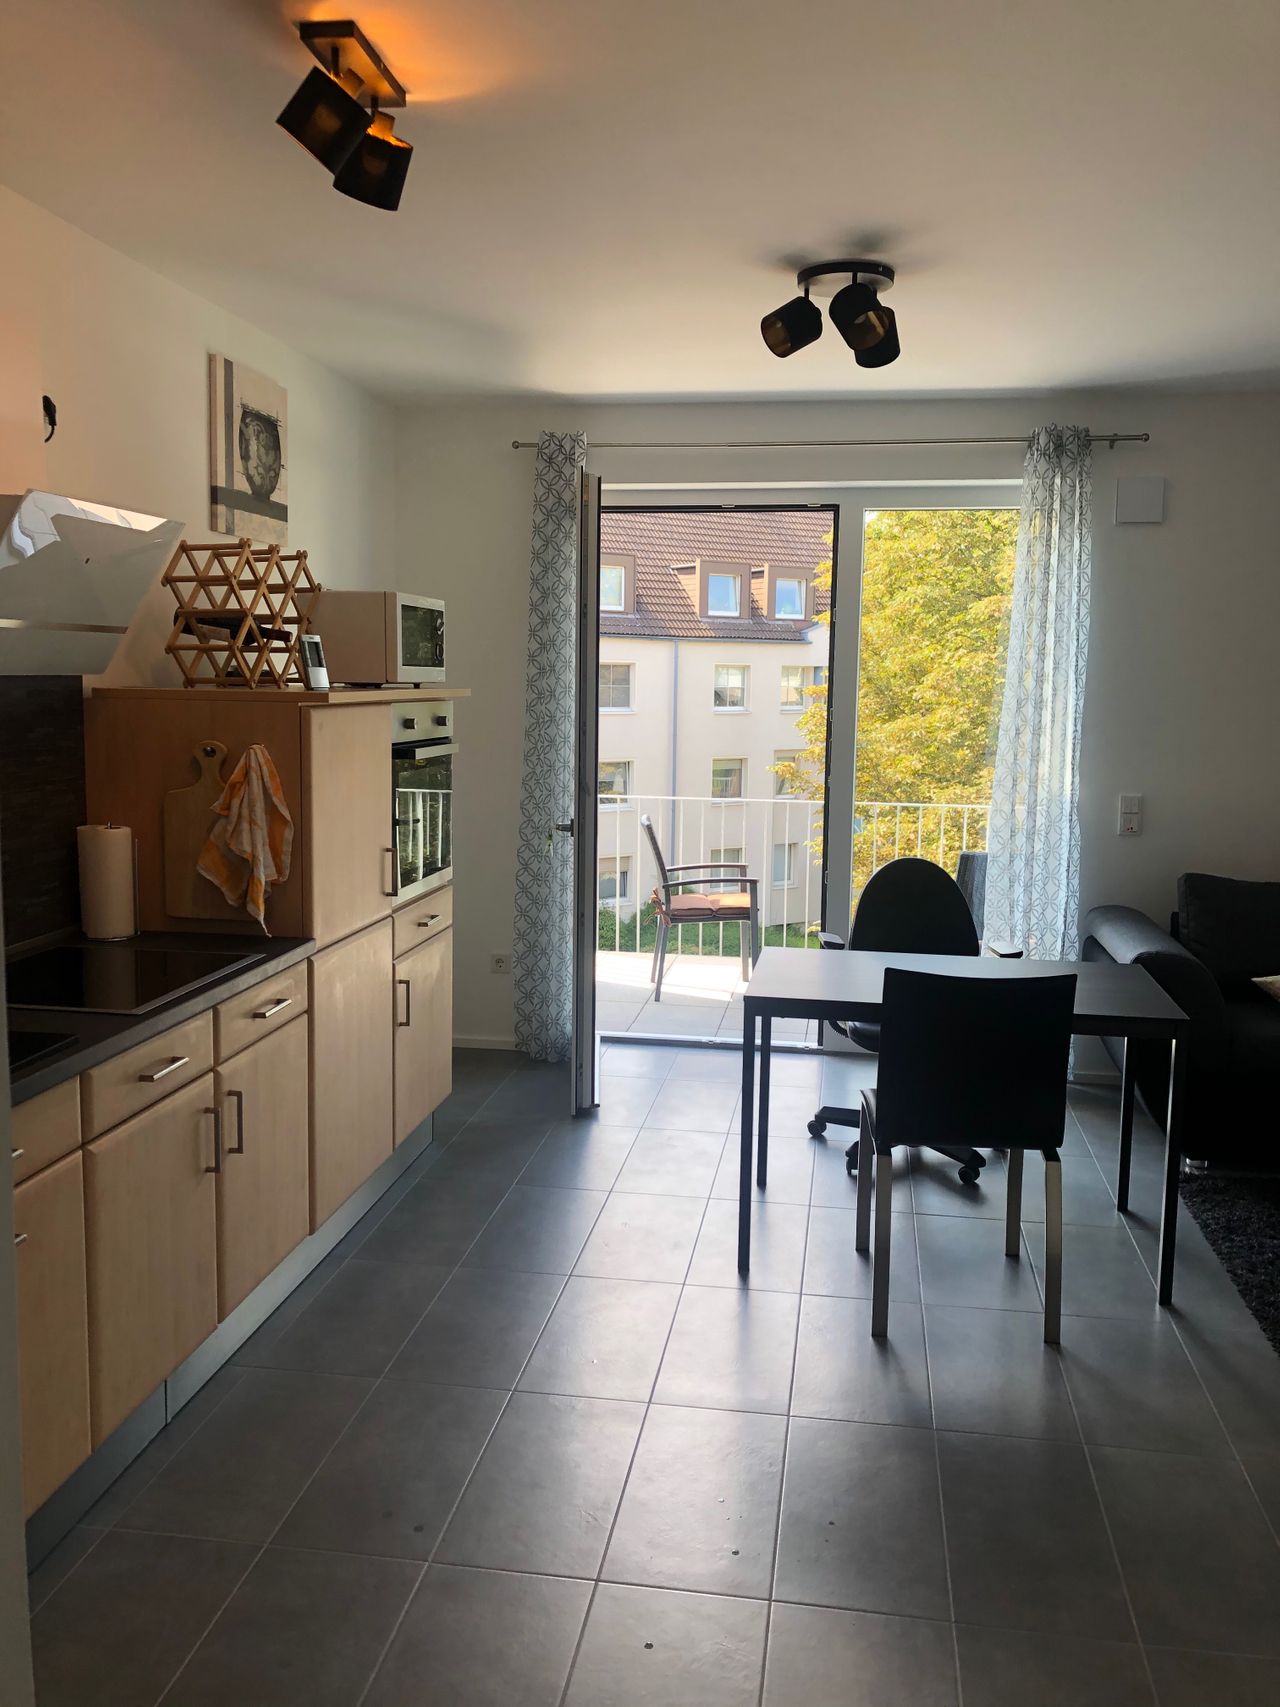 2 room-modern 2020s apartment in Cologne-Lövenich (West) close to S-Bahn station